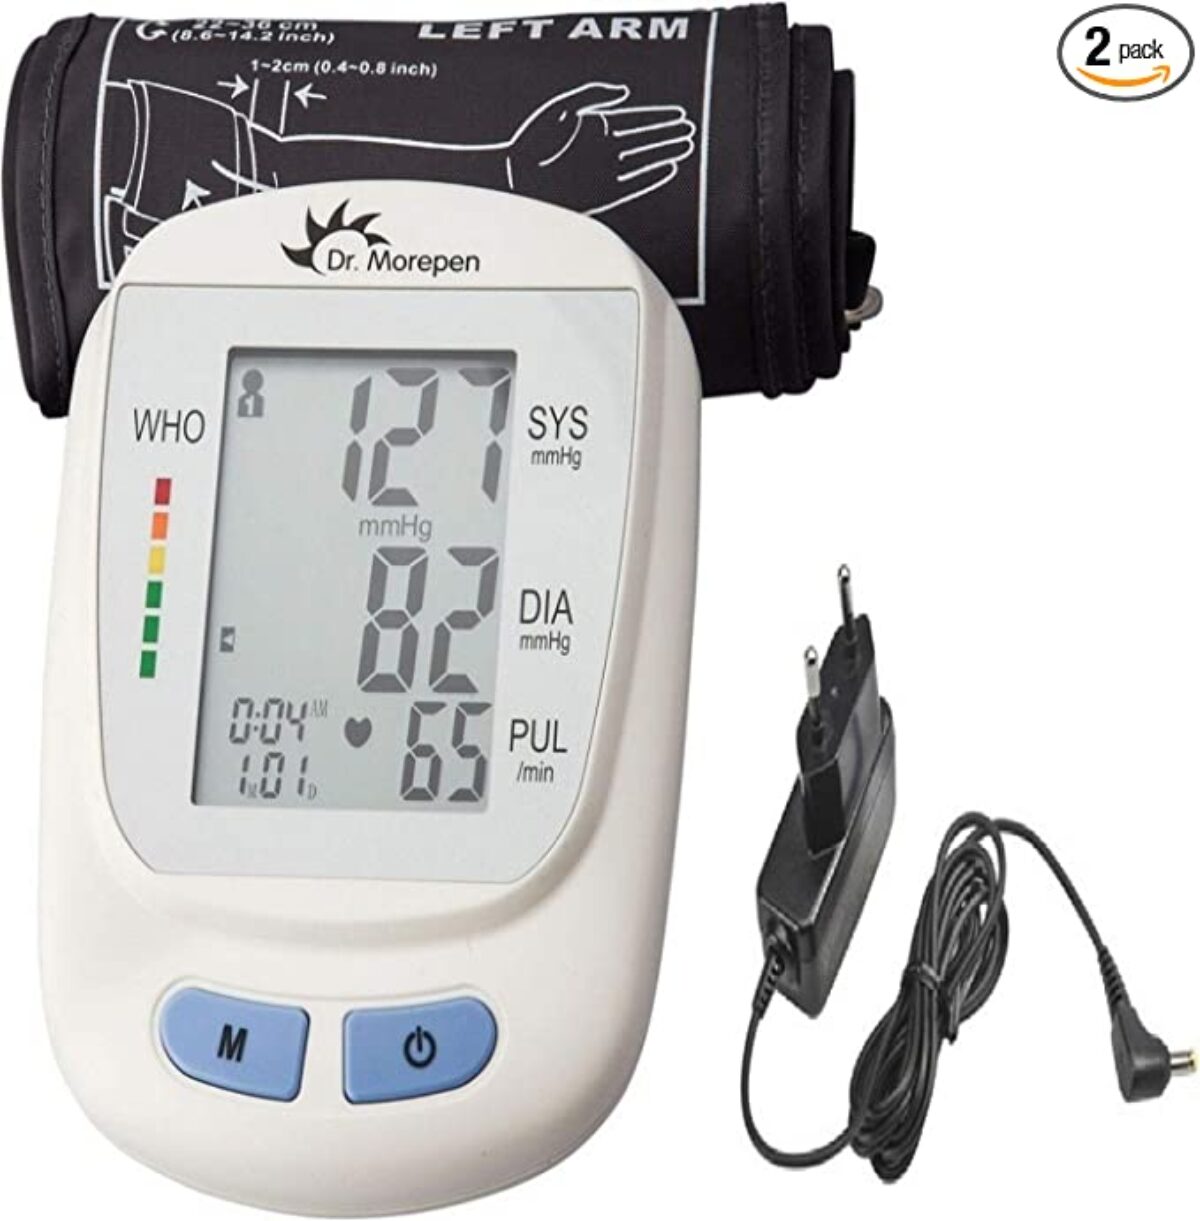  Omron Hem 7121J Fully Automatic Digital Blood Pressure Monitor  with Intellisense Technology & Cuff Wrapping Guide Most Accurate  Measurement (White) (Power Source - Battrey) : Health & Household